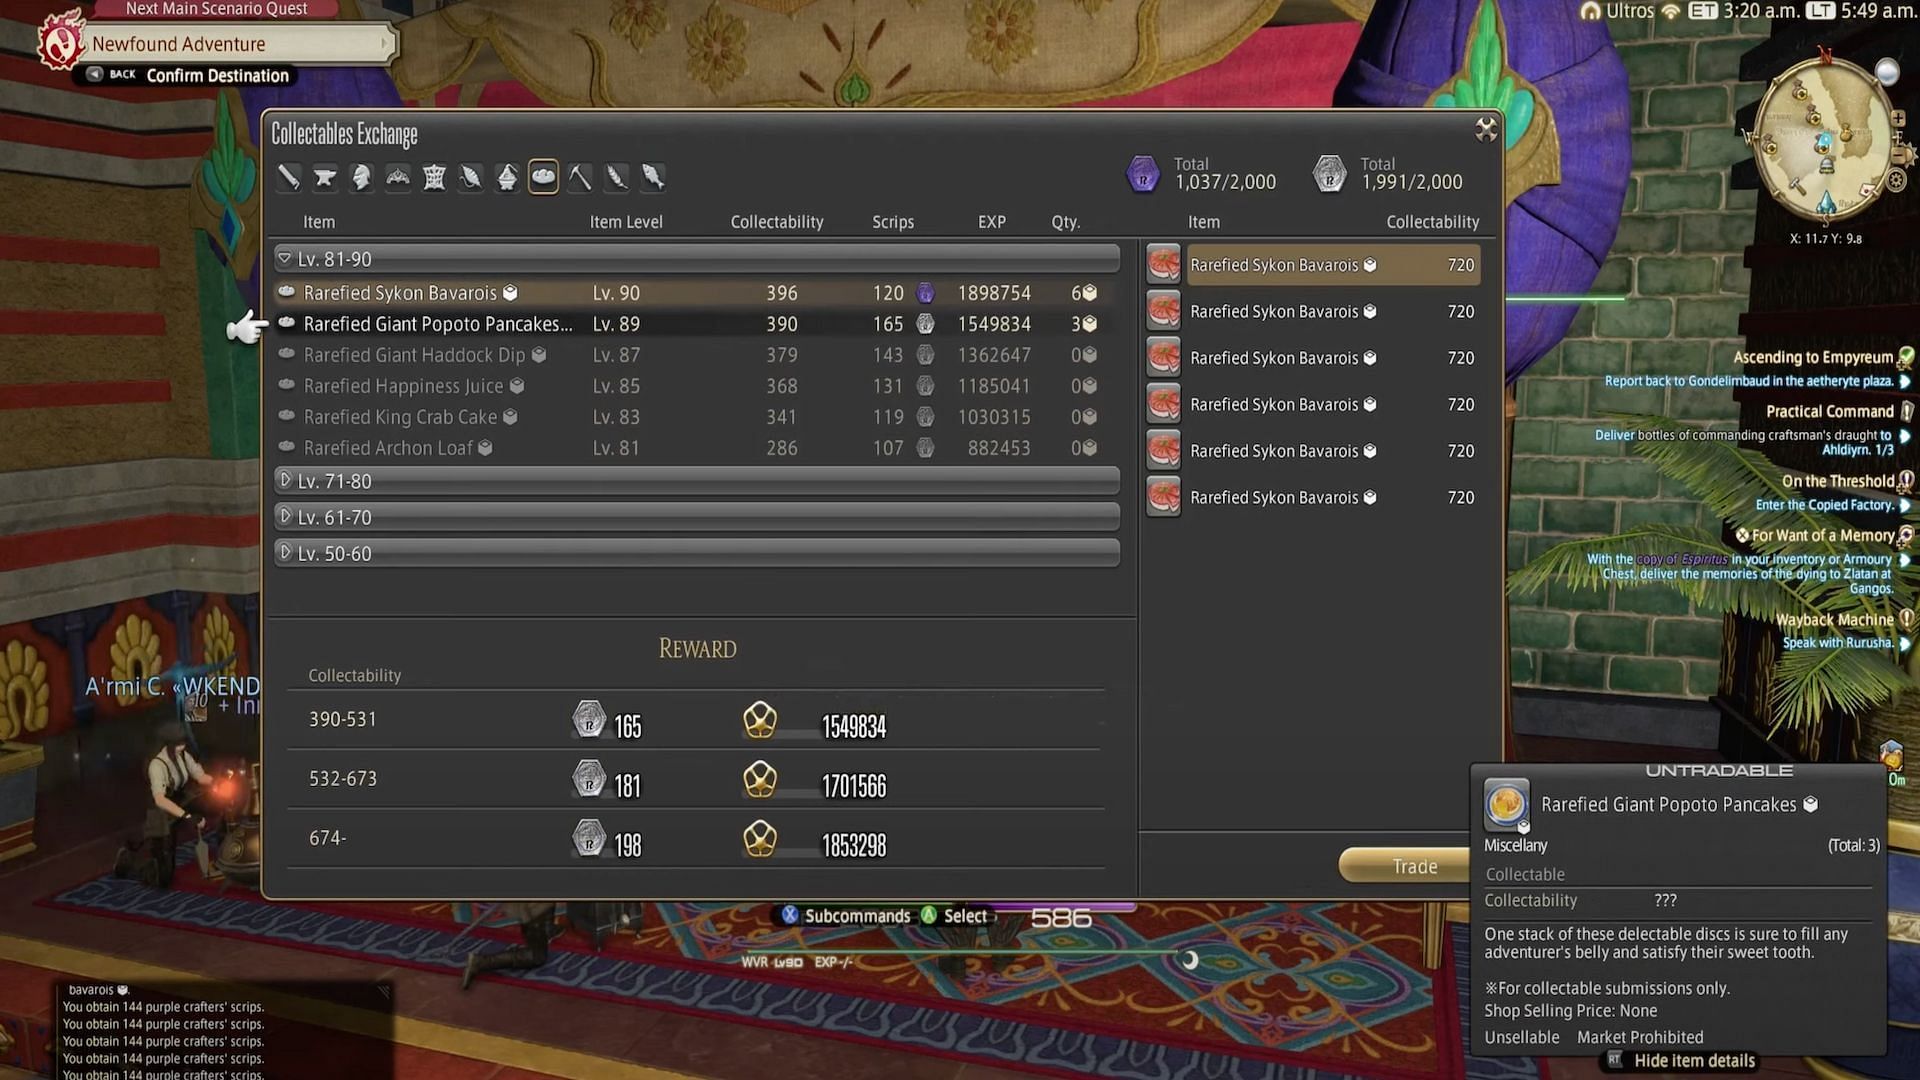 Players are also able to trade their highly collectible items to the Collectible Appraiser to gain more Purple Scrip (Image via Artysan FFXIV/YouTube)